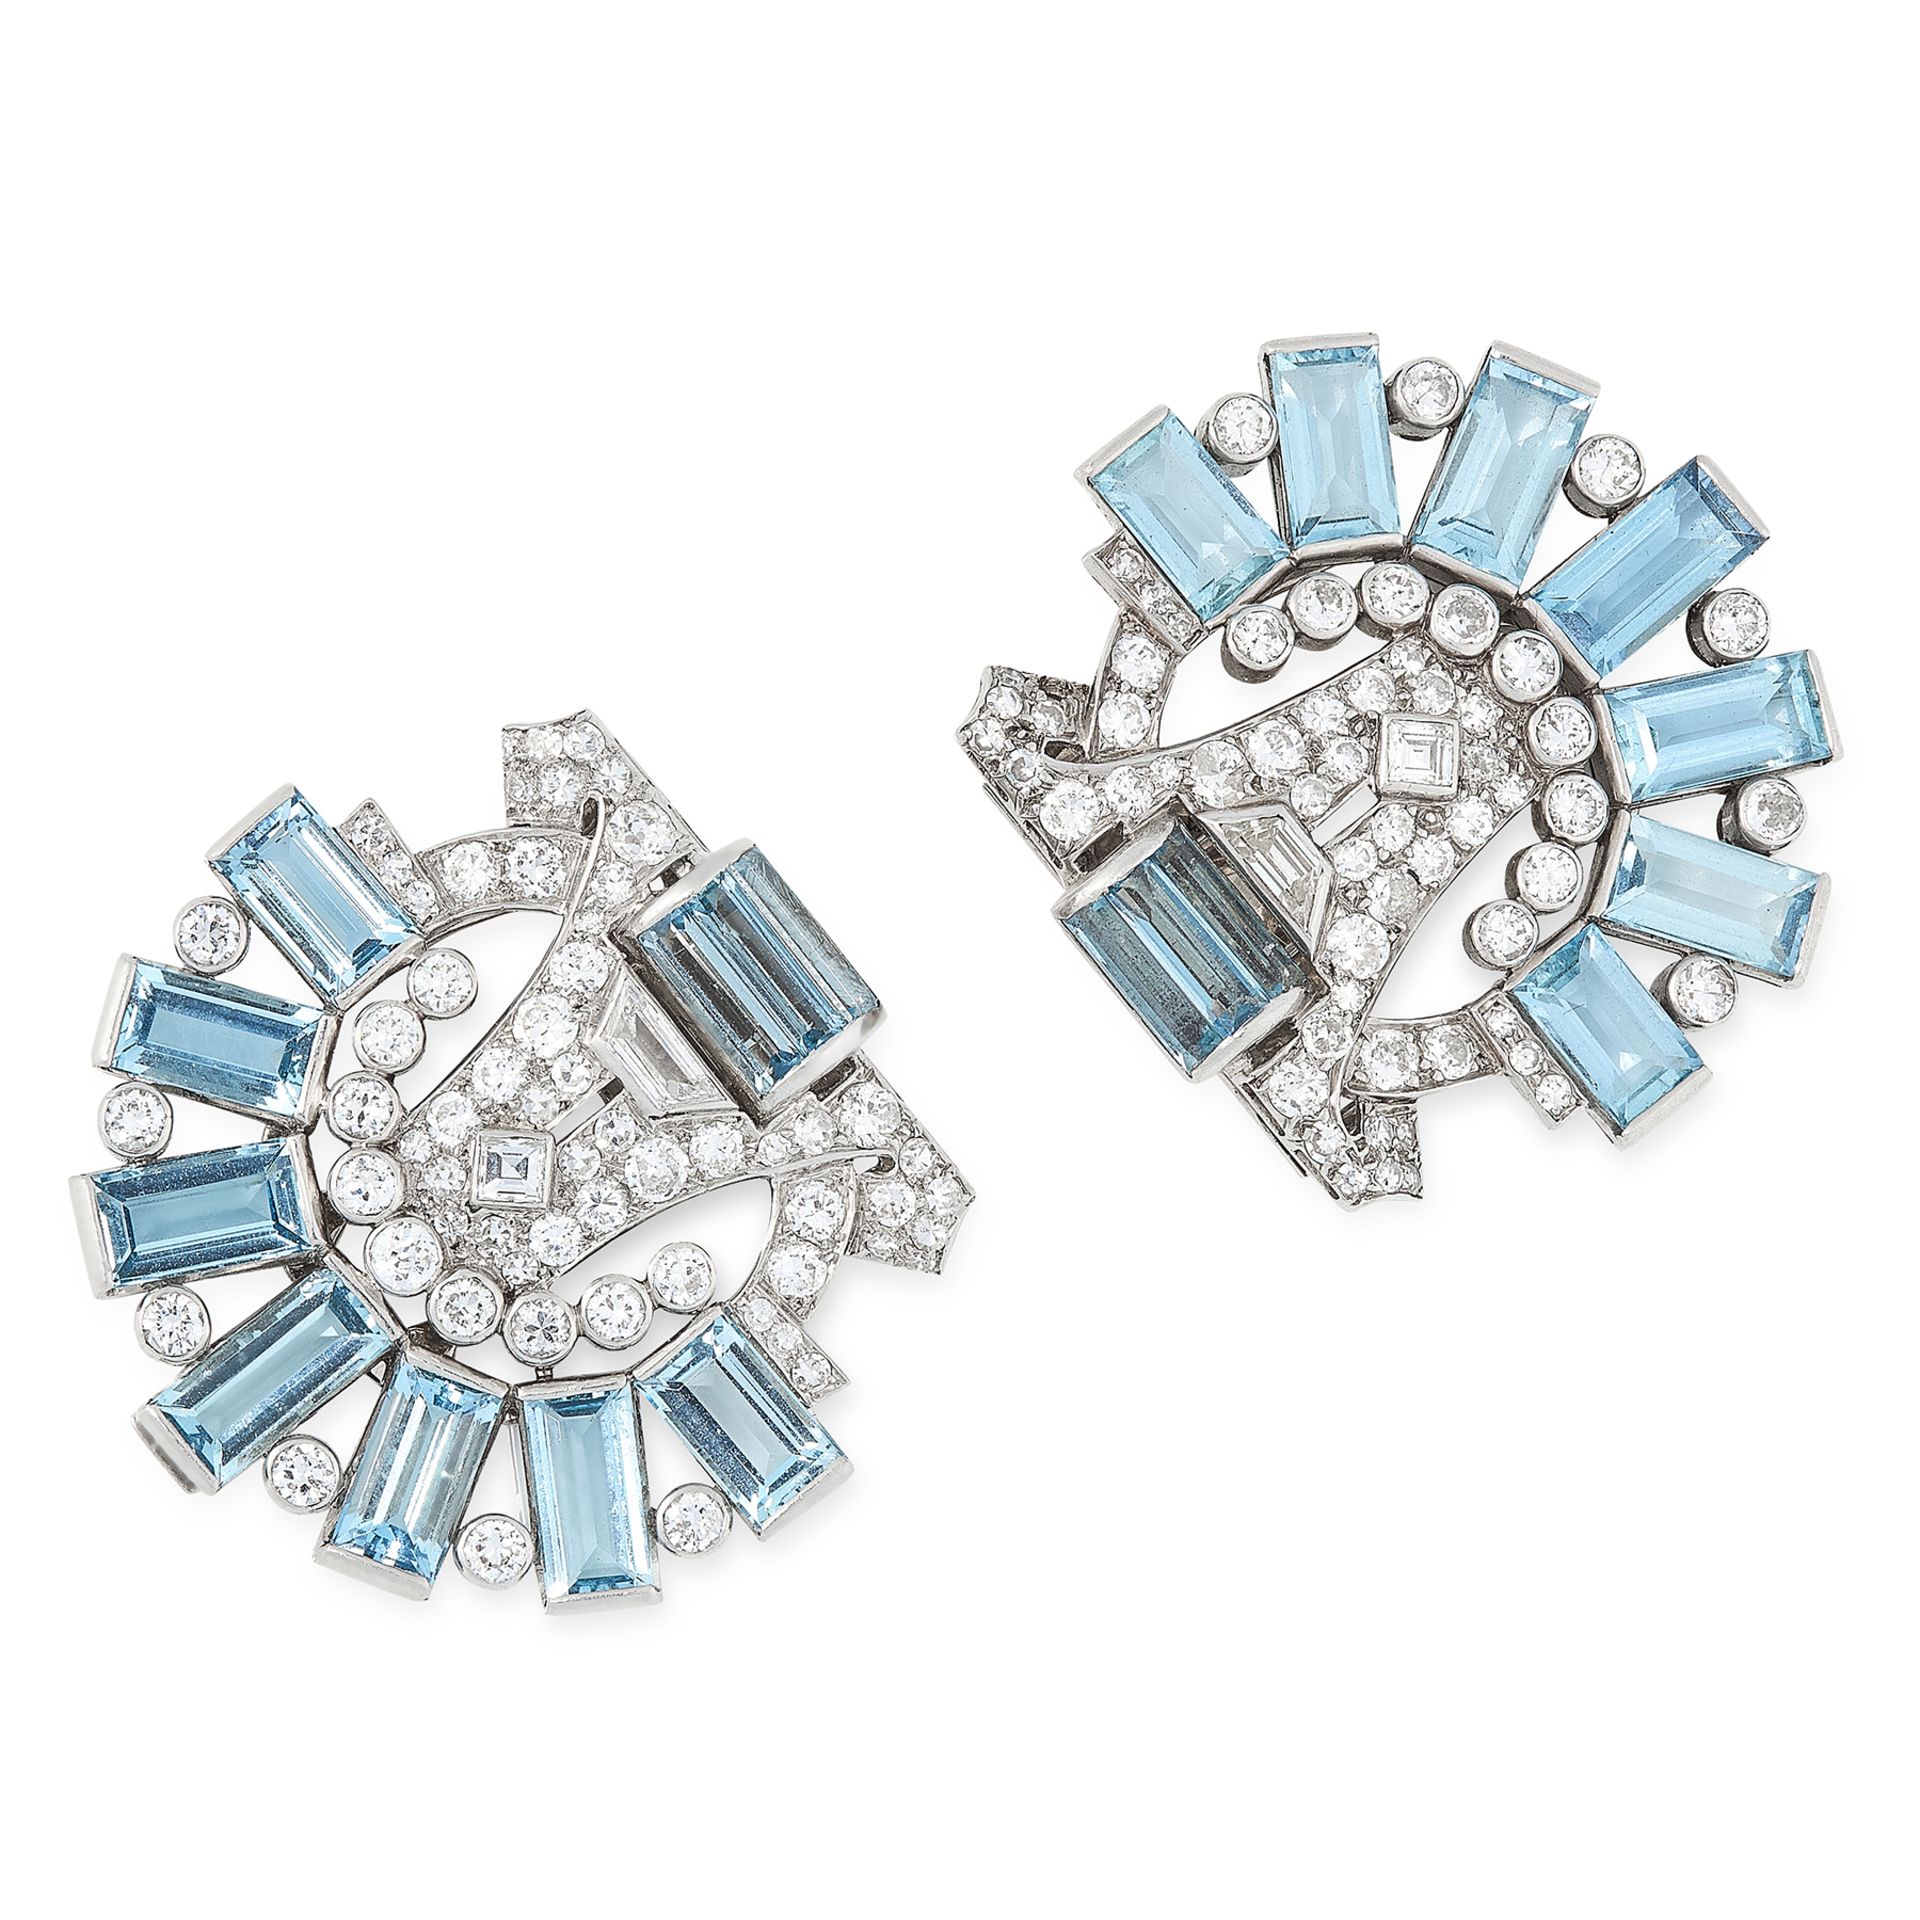 A PAIR OF AQUAMARINE AND DIAMOND CLIP BROOCHES, CARTIER CIRCA 1940 in 18ct white gold, each set with